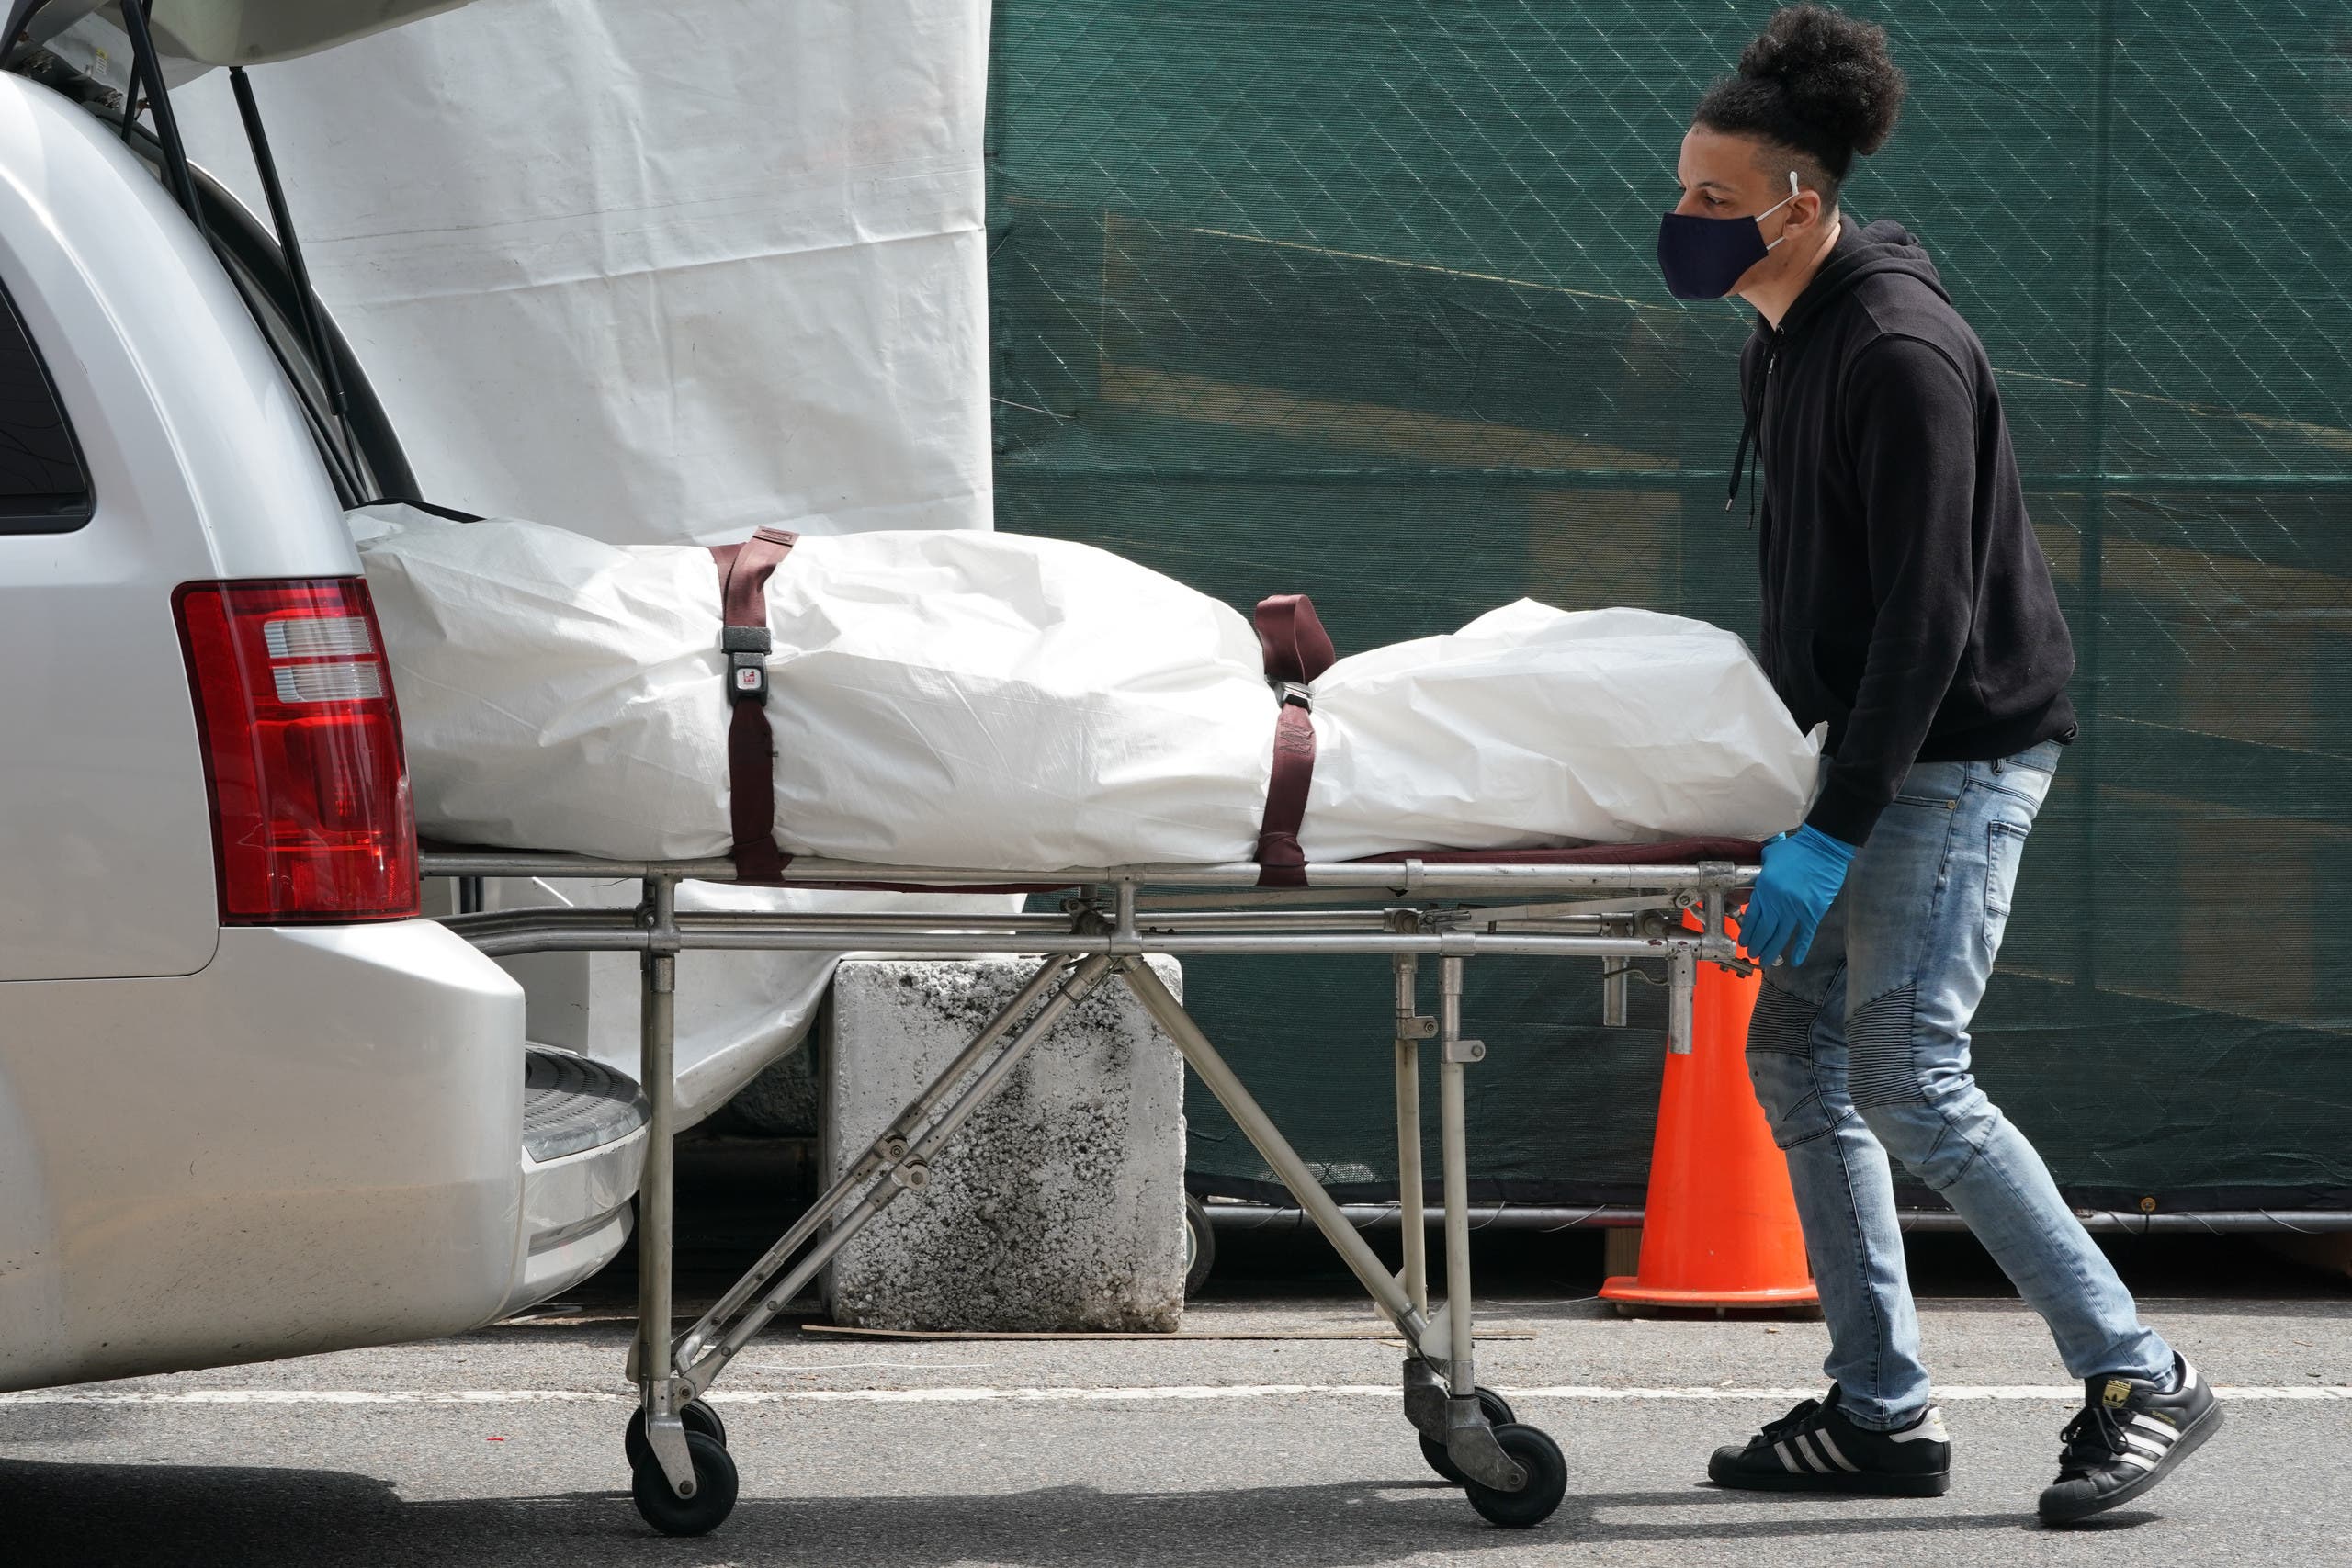 In this file photo taken on April 8, 2020, a body is moved from a refrigeration truck serving as a temporary morgue to a vehicle at the Brooklyn Hospital Center, in the Borough of Brooklyn in New York. (AFP)